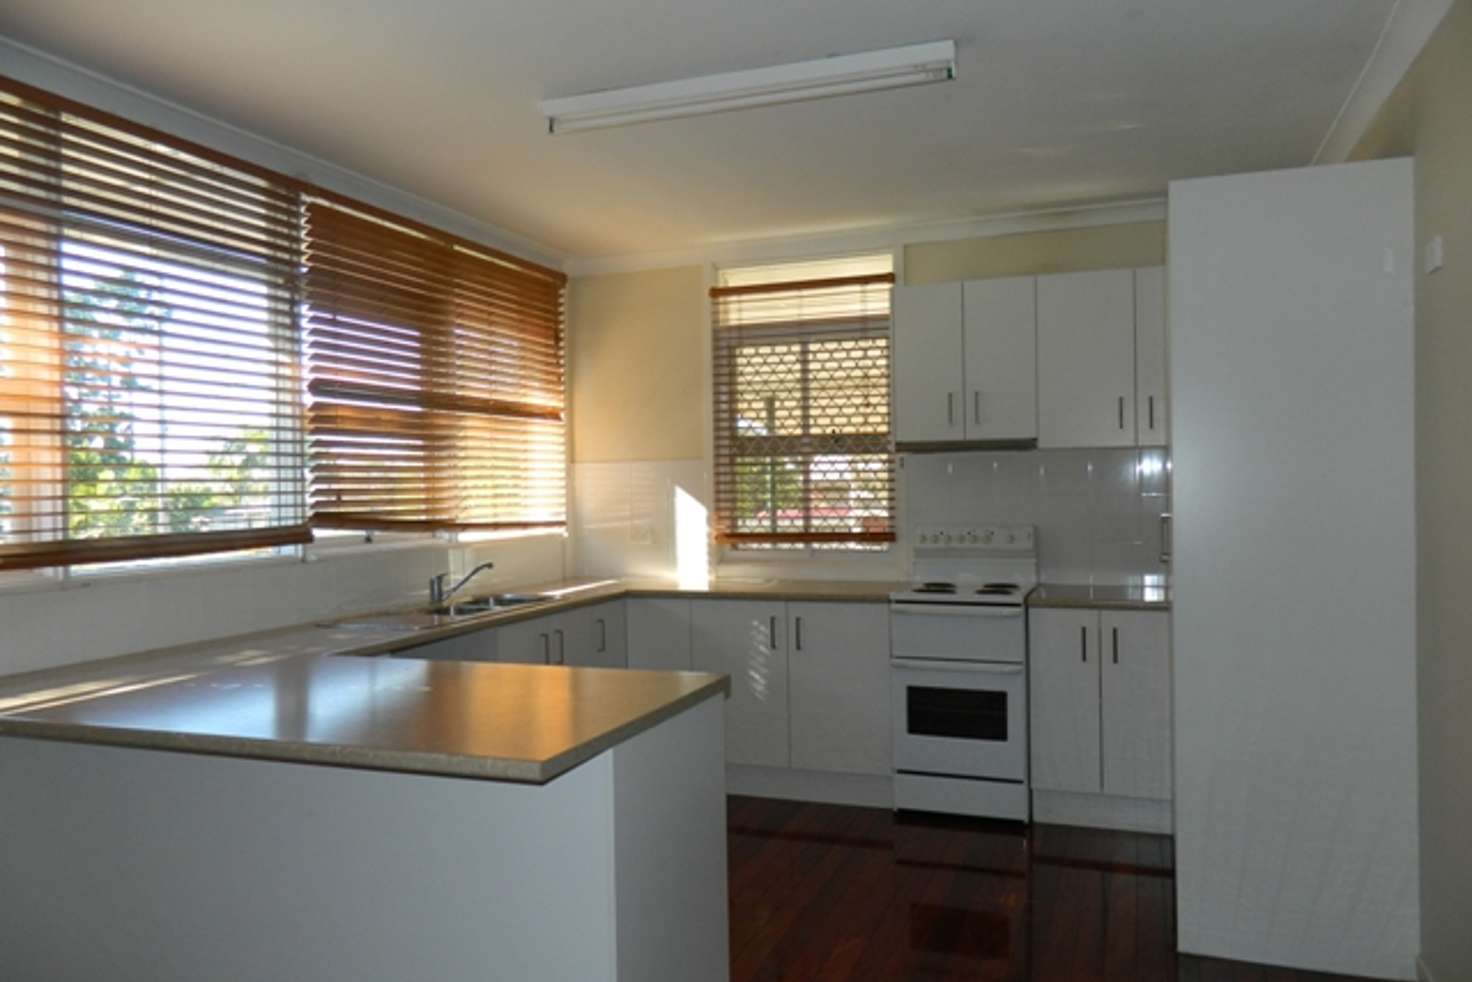 Main view of Homely house listing, 30 Cintra St, Durack QLD 4077